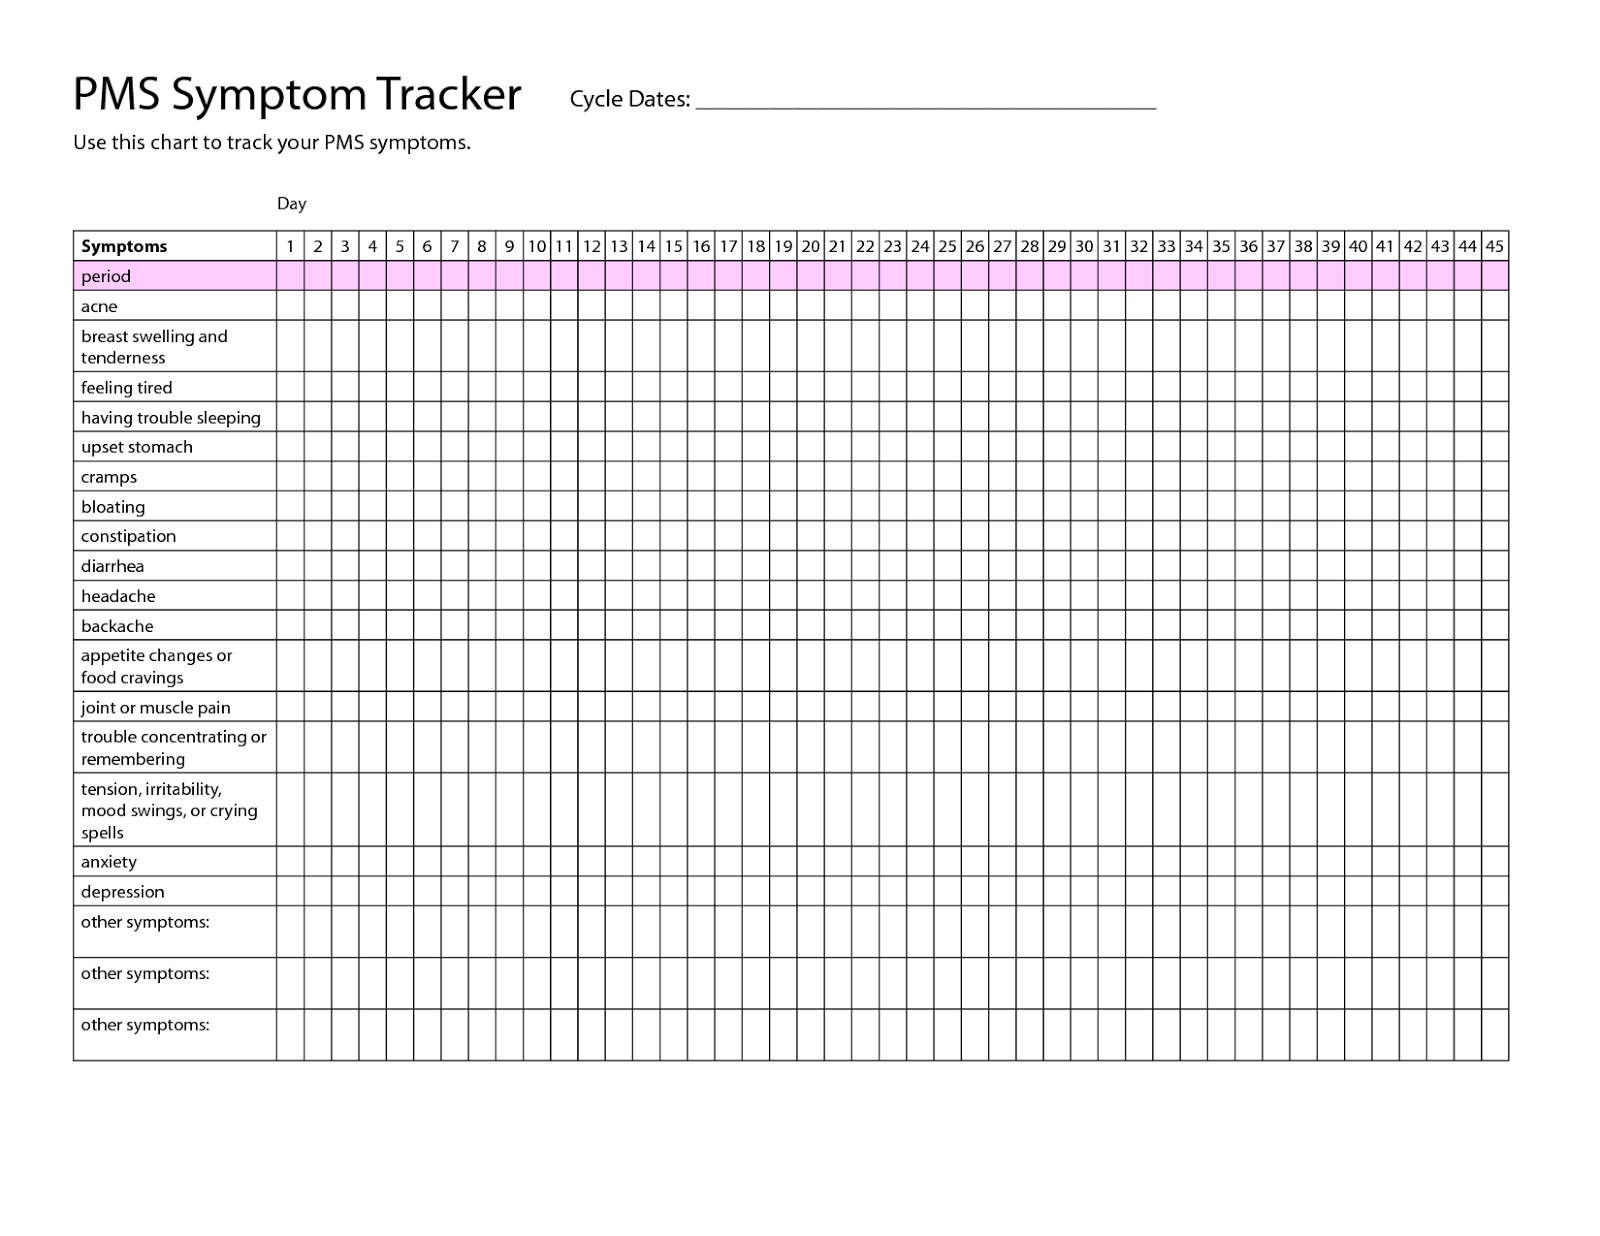 Meet My Pmdd - Moods And Musings: Mood Charts And Tracking